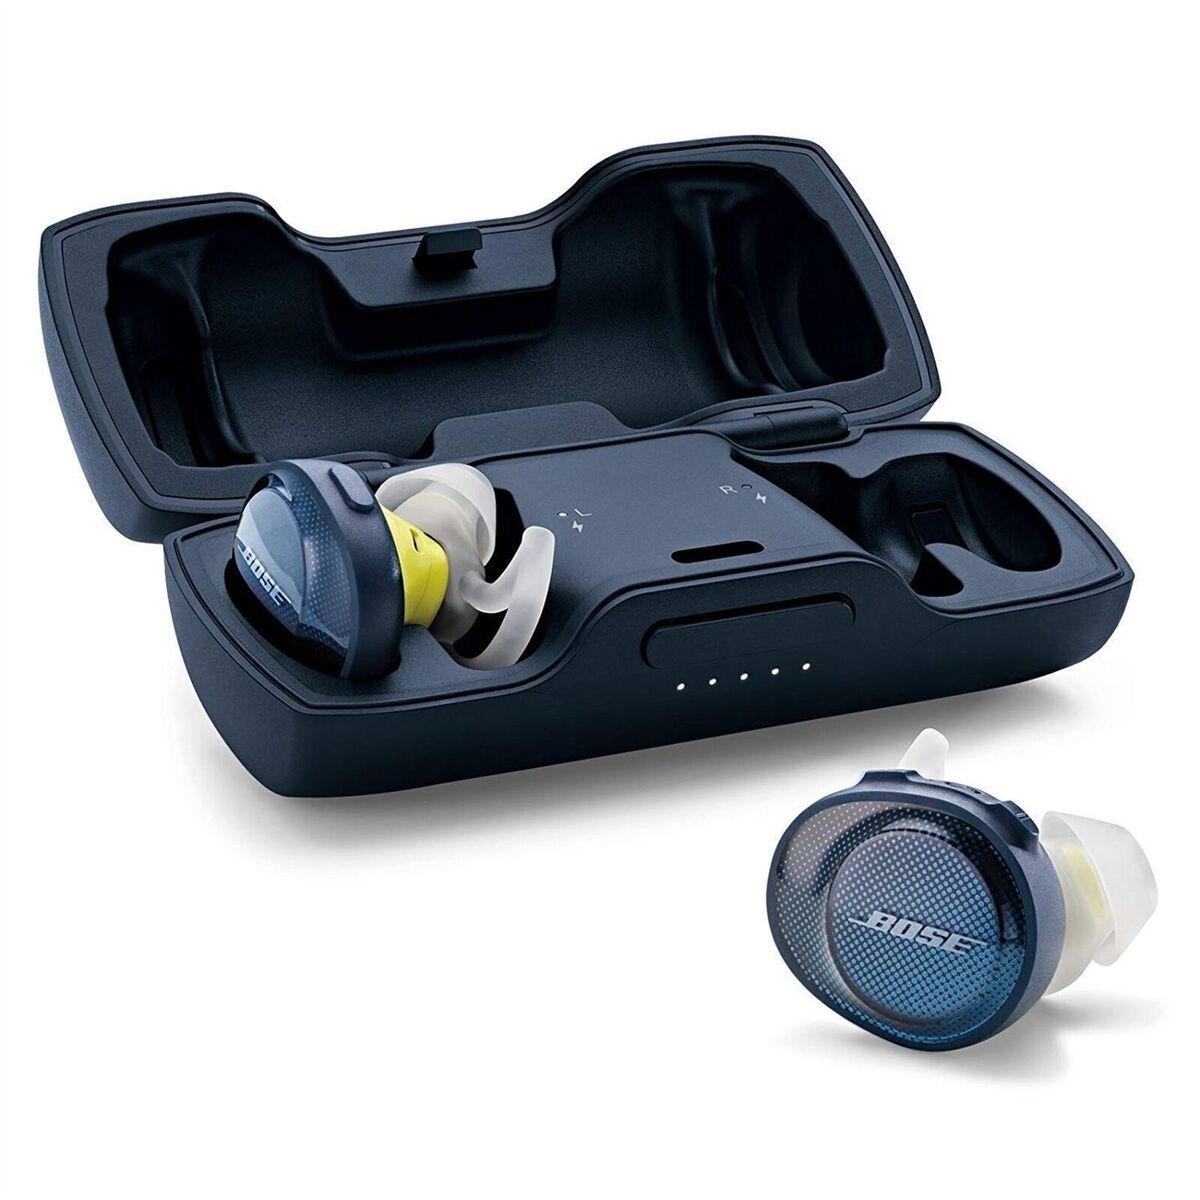 understanding-the-battery-life-of-bose-wireless-earbuds